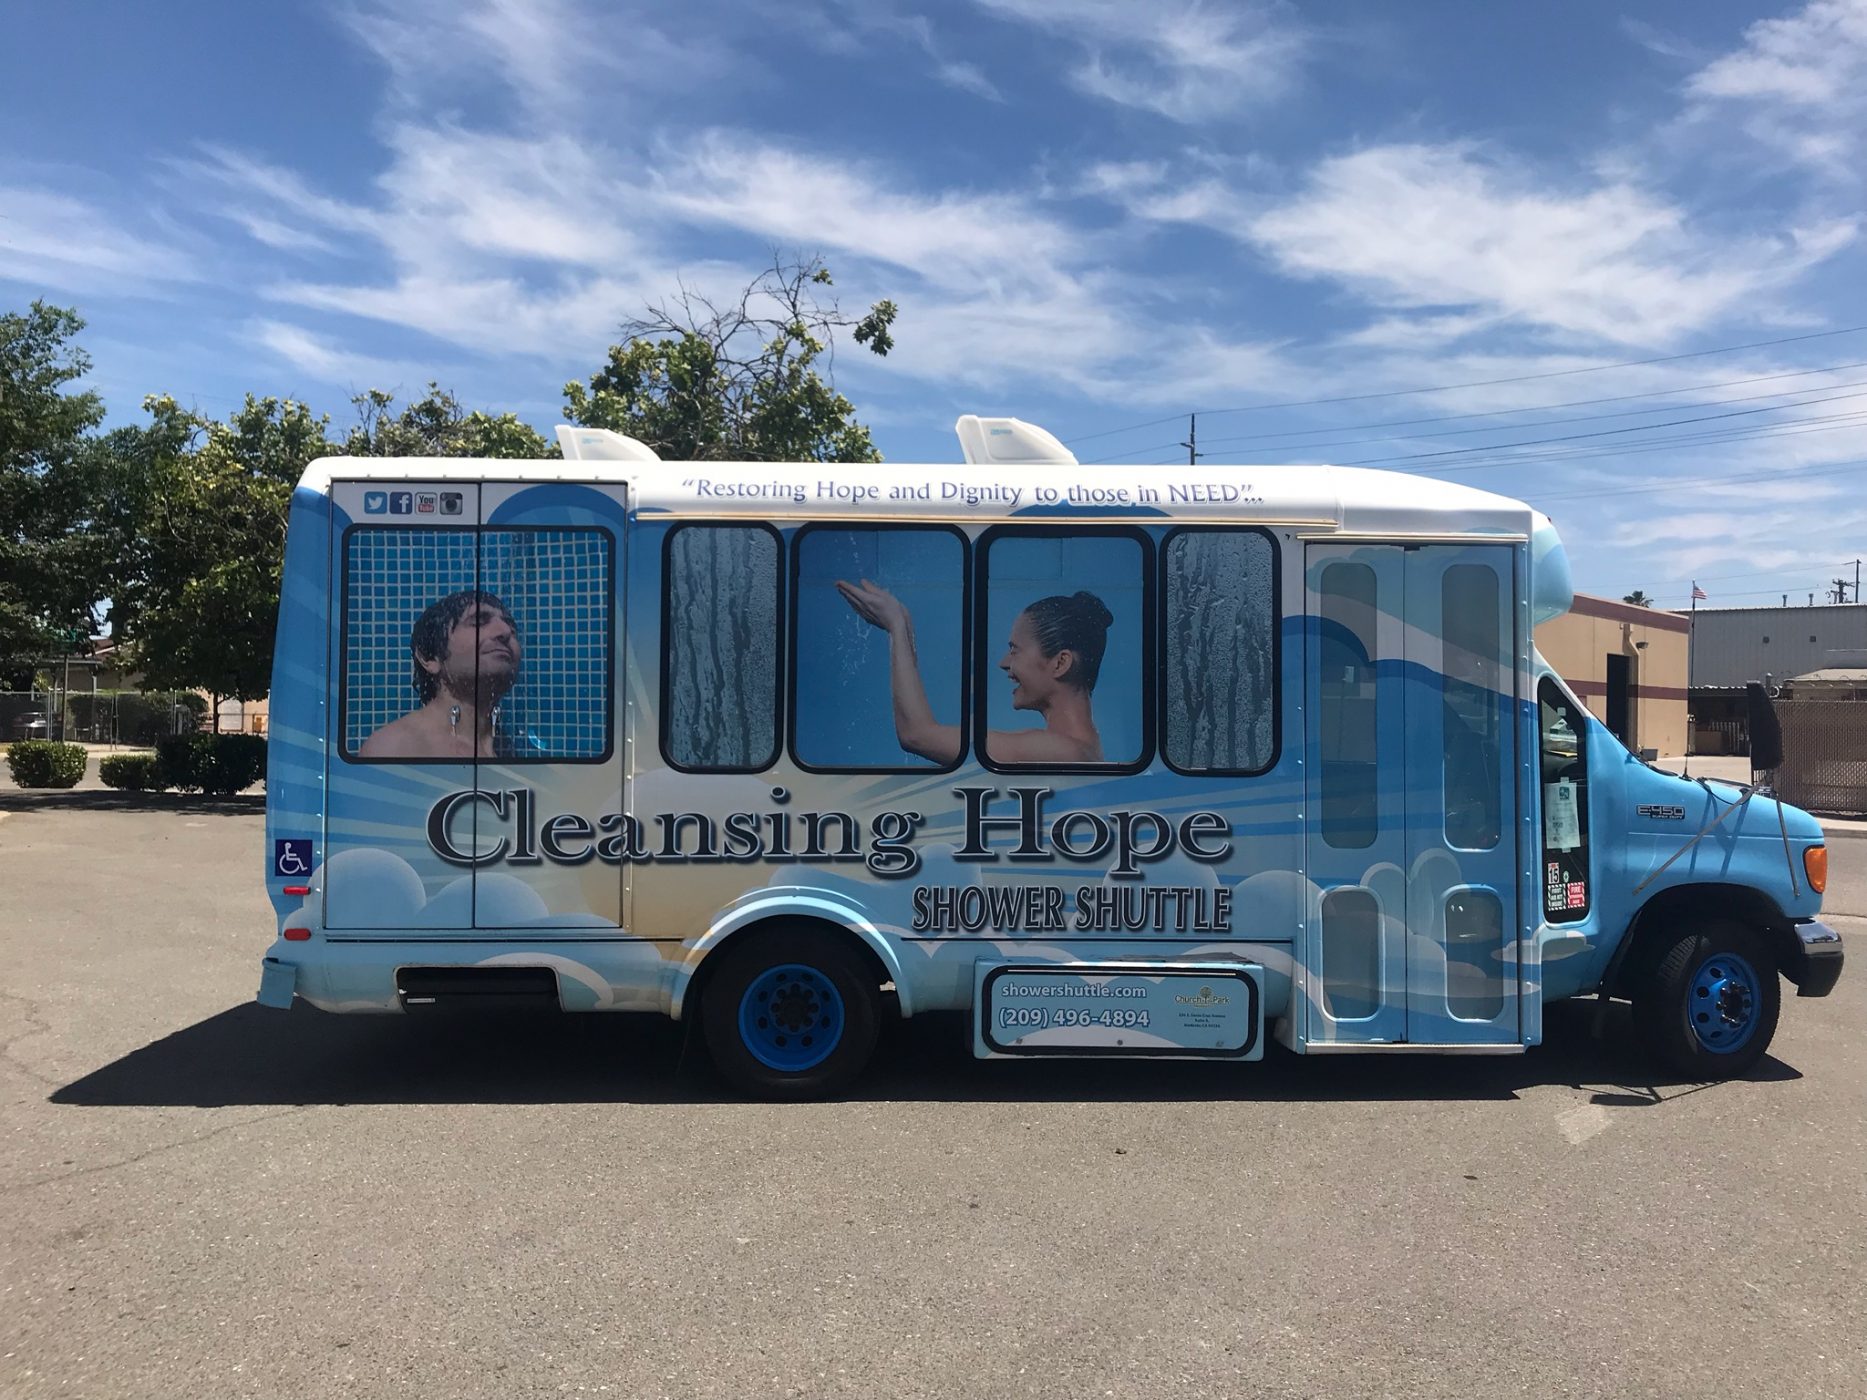 Bus Advertising Wrap for Cleansing Hope Shuttle